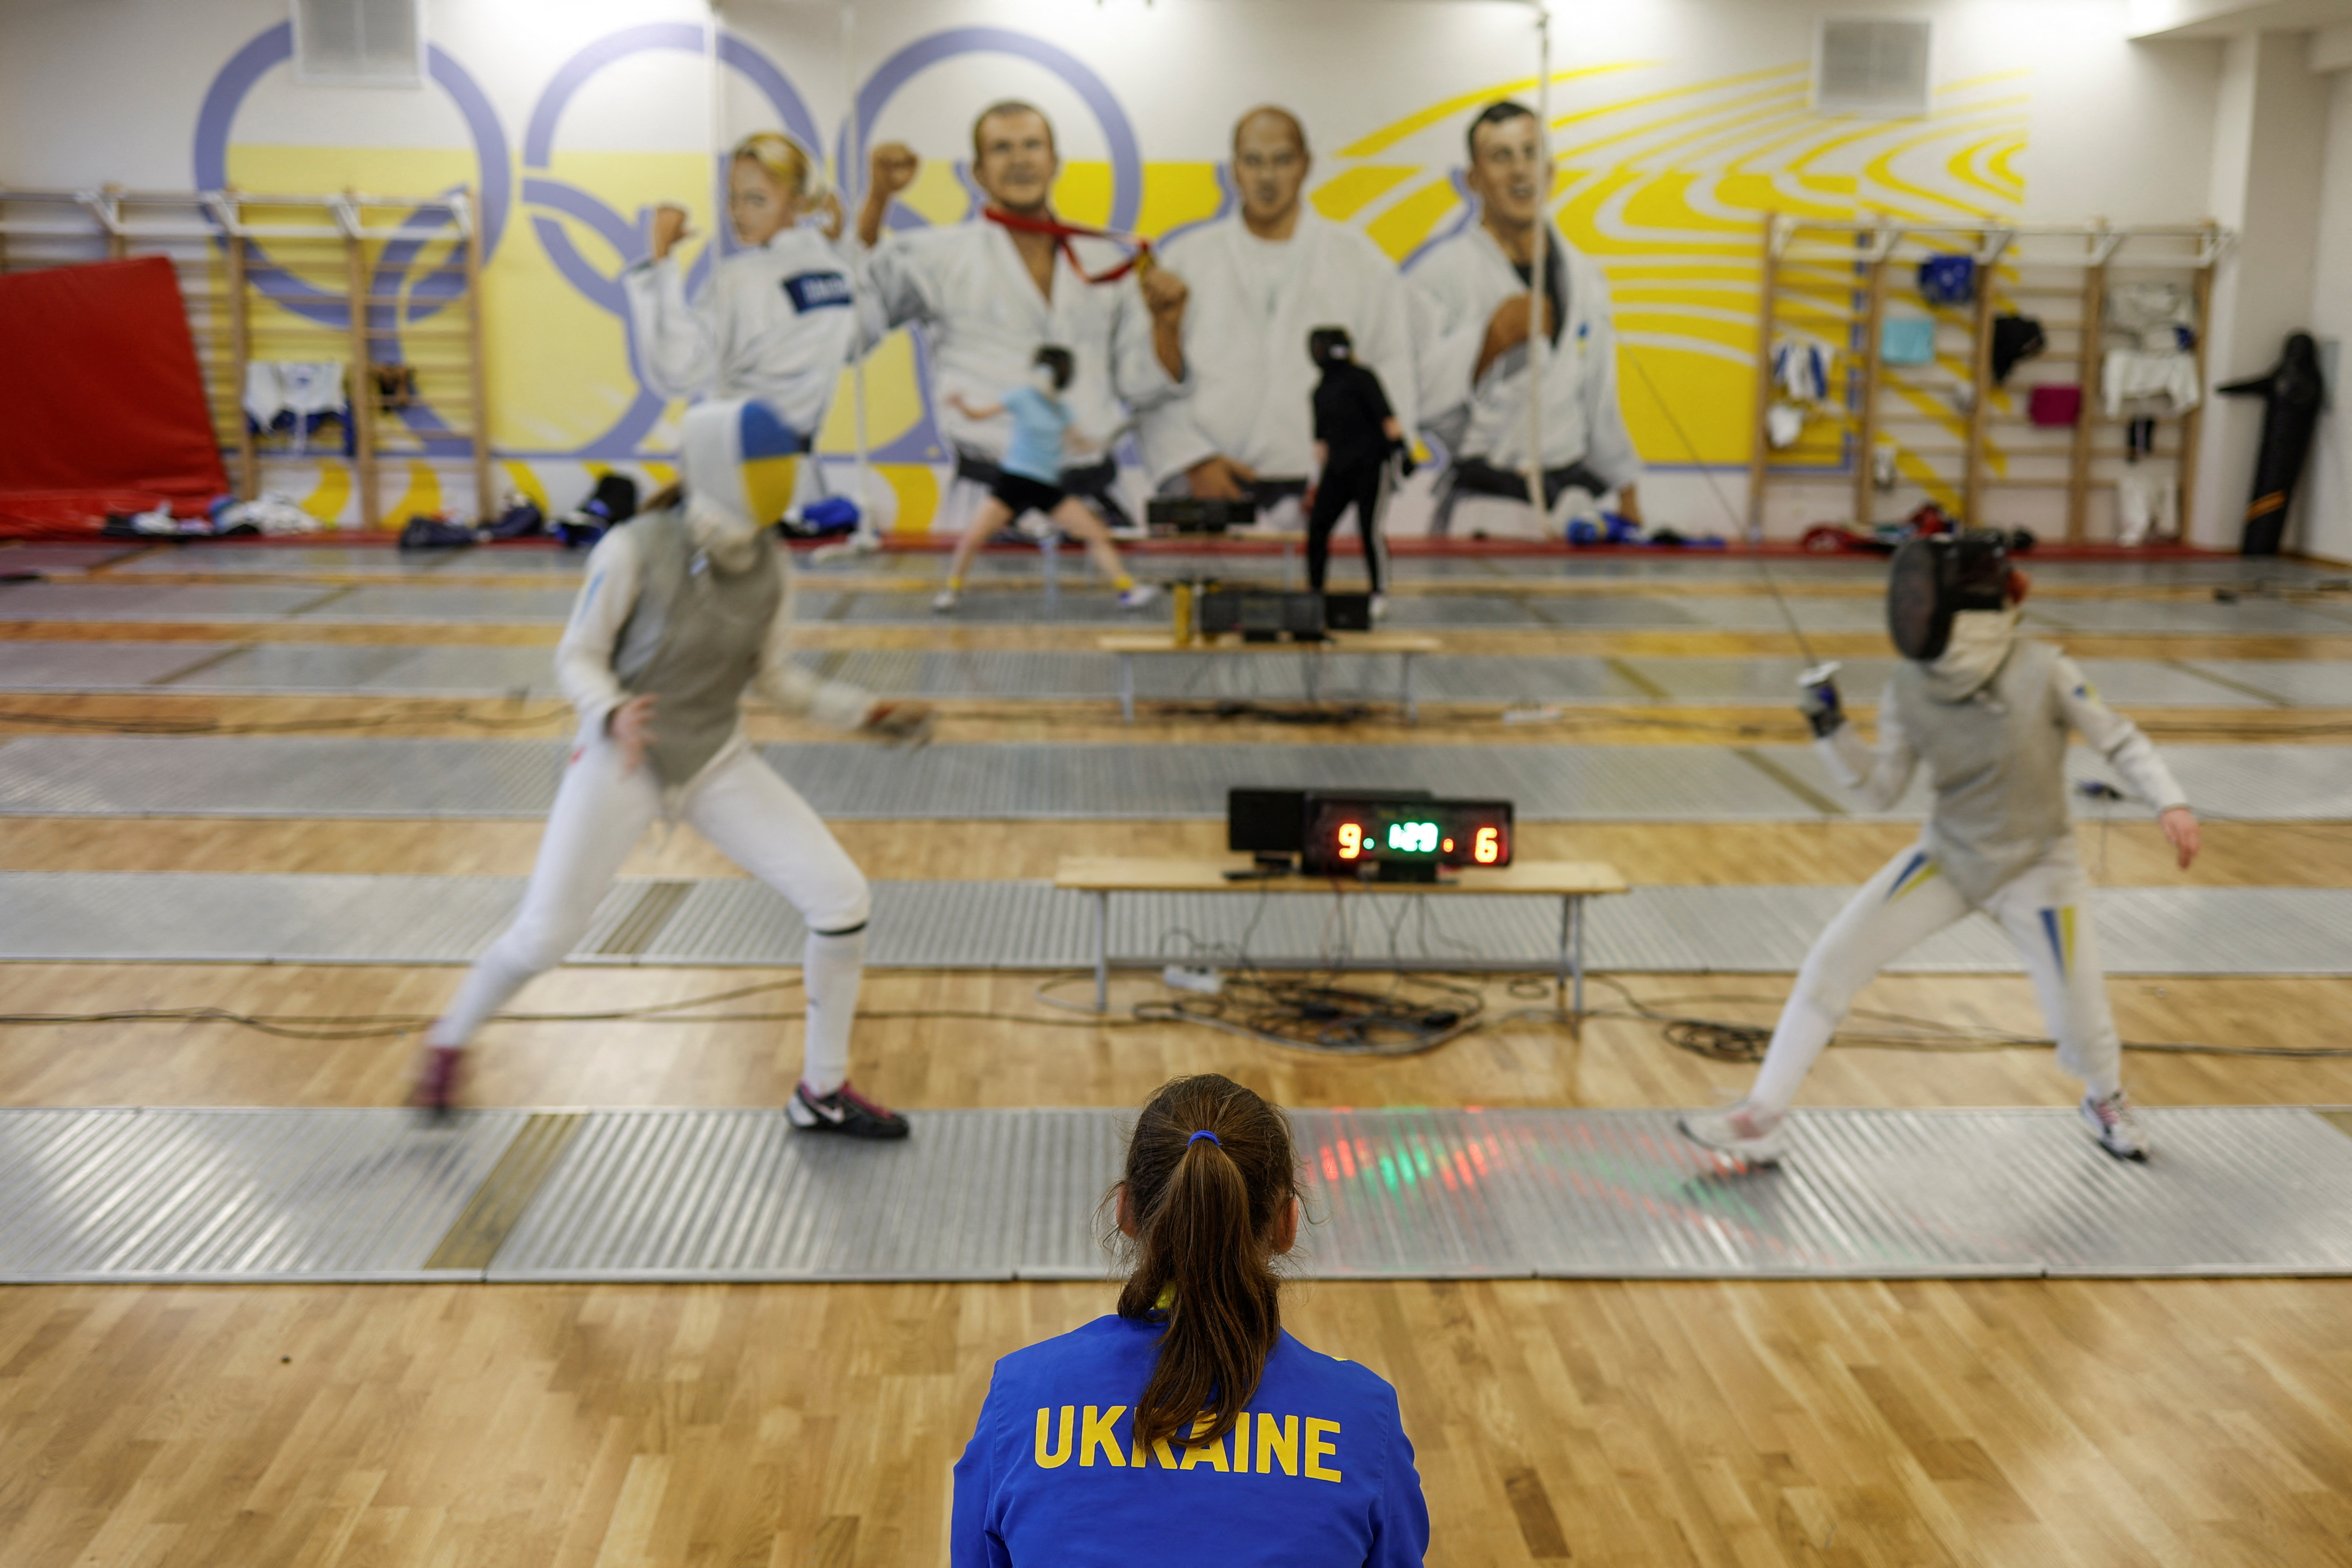 Members of Ukraine's fencing team attend a training session at the Olympic training base in Kyiv